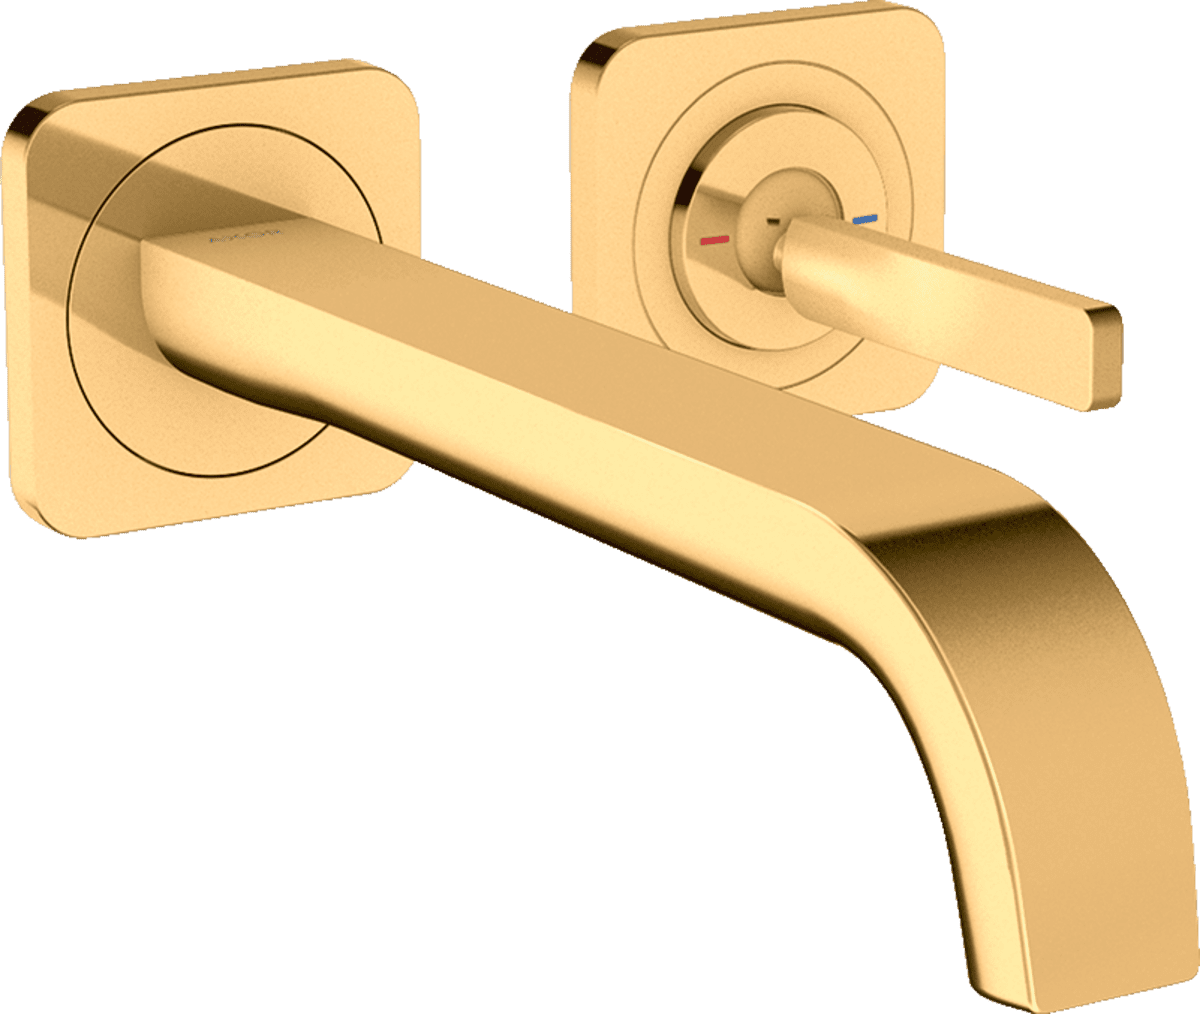 Picture of HANSGROHE AXOR Citterio E Single lever basin mixer for concealed installation wall-mounted with pin handle, spout 221 mm and escutcheons #36106990 - Polished Gold Optic